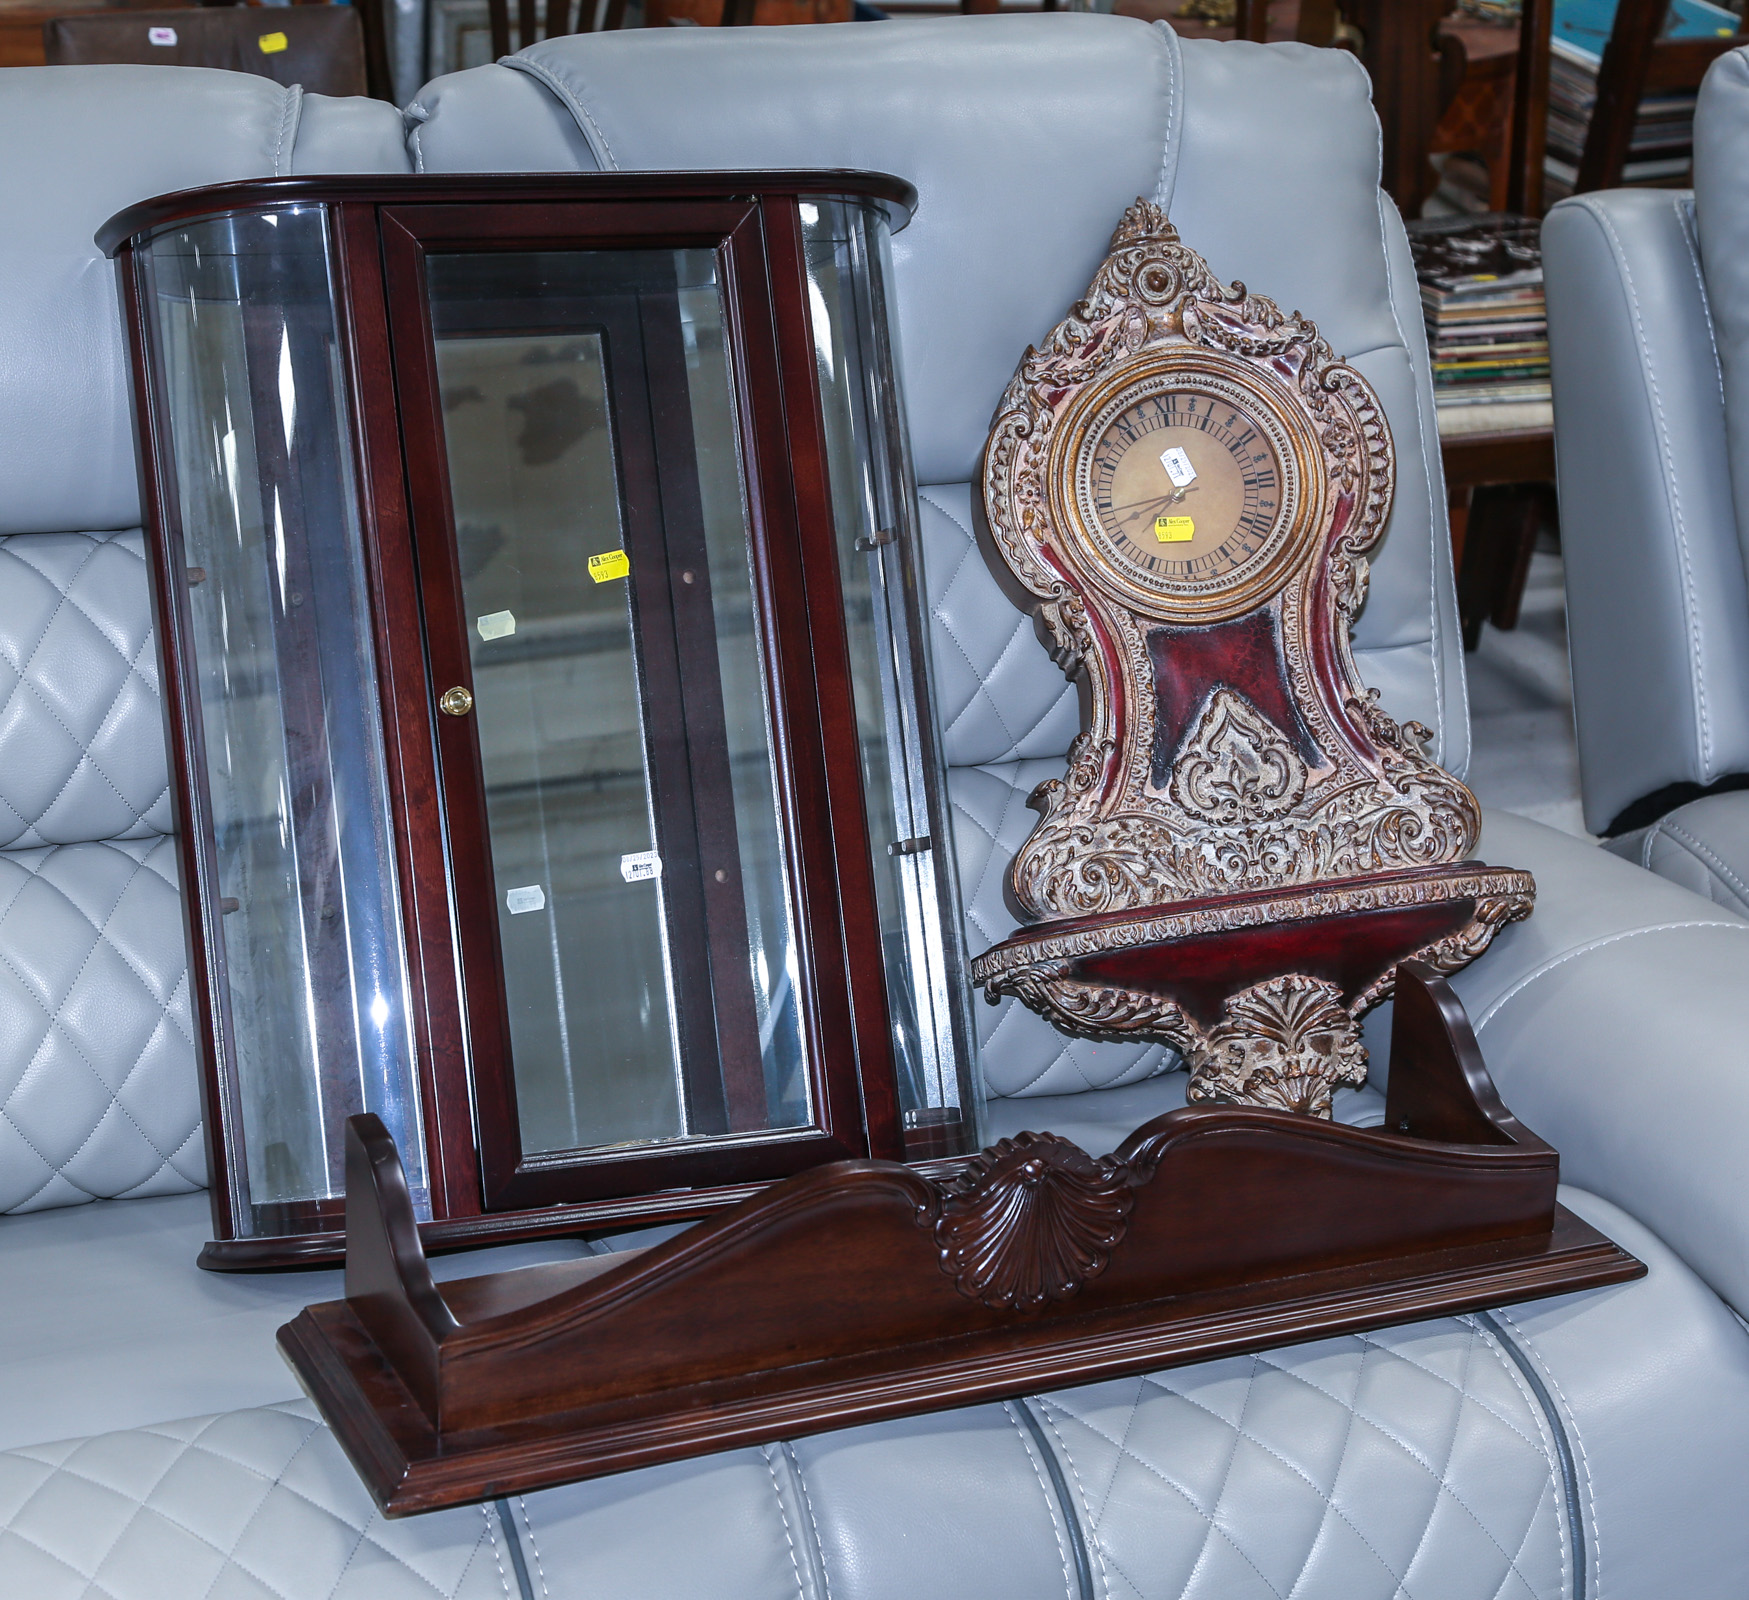 A WALL CLOCK MANTLE PIECE DISPLAY 3cb3be